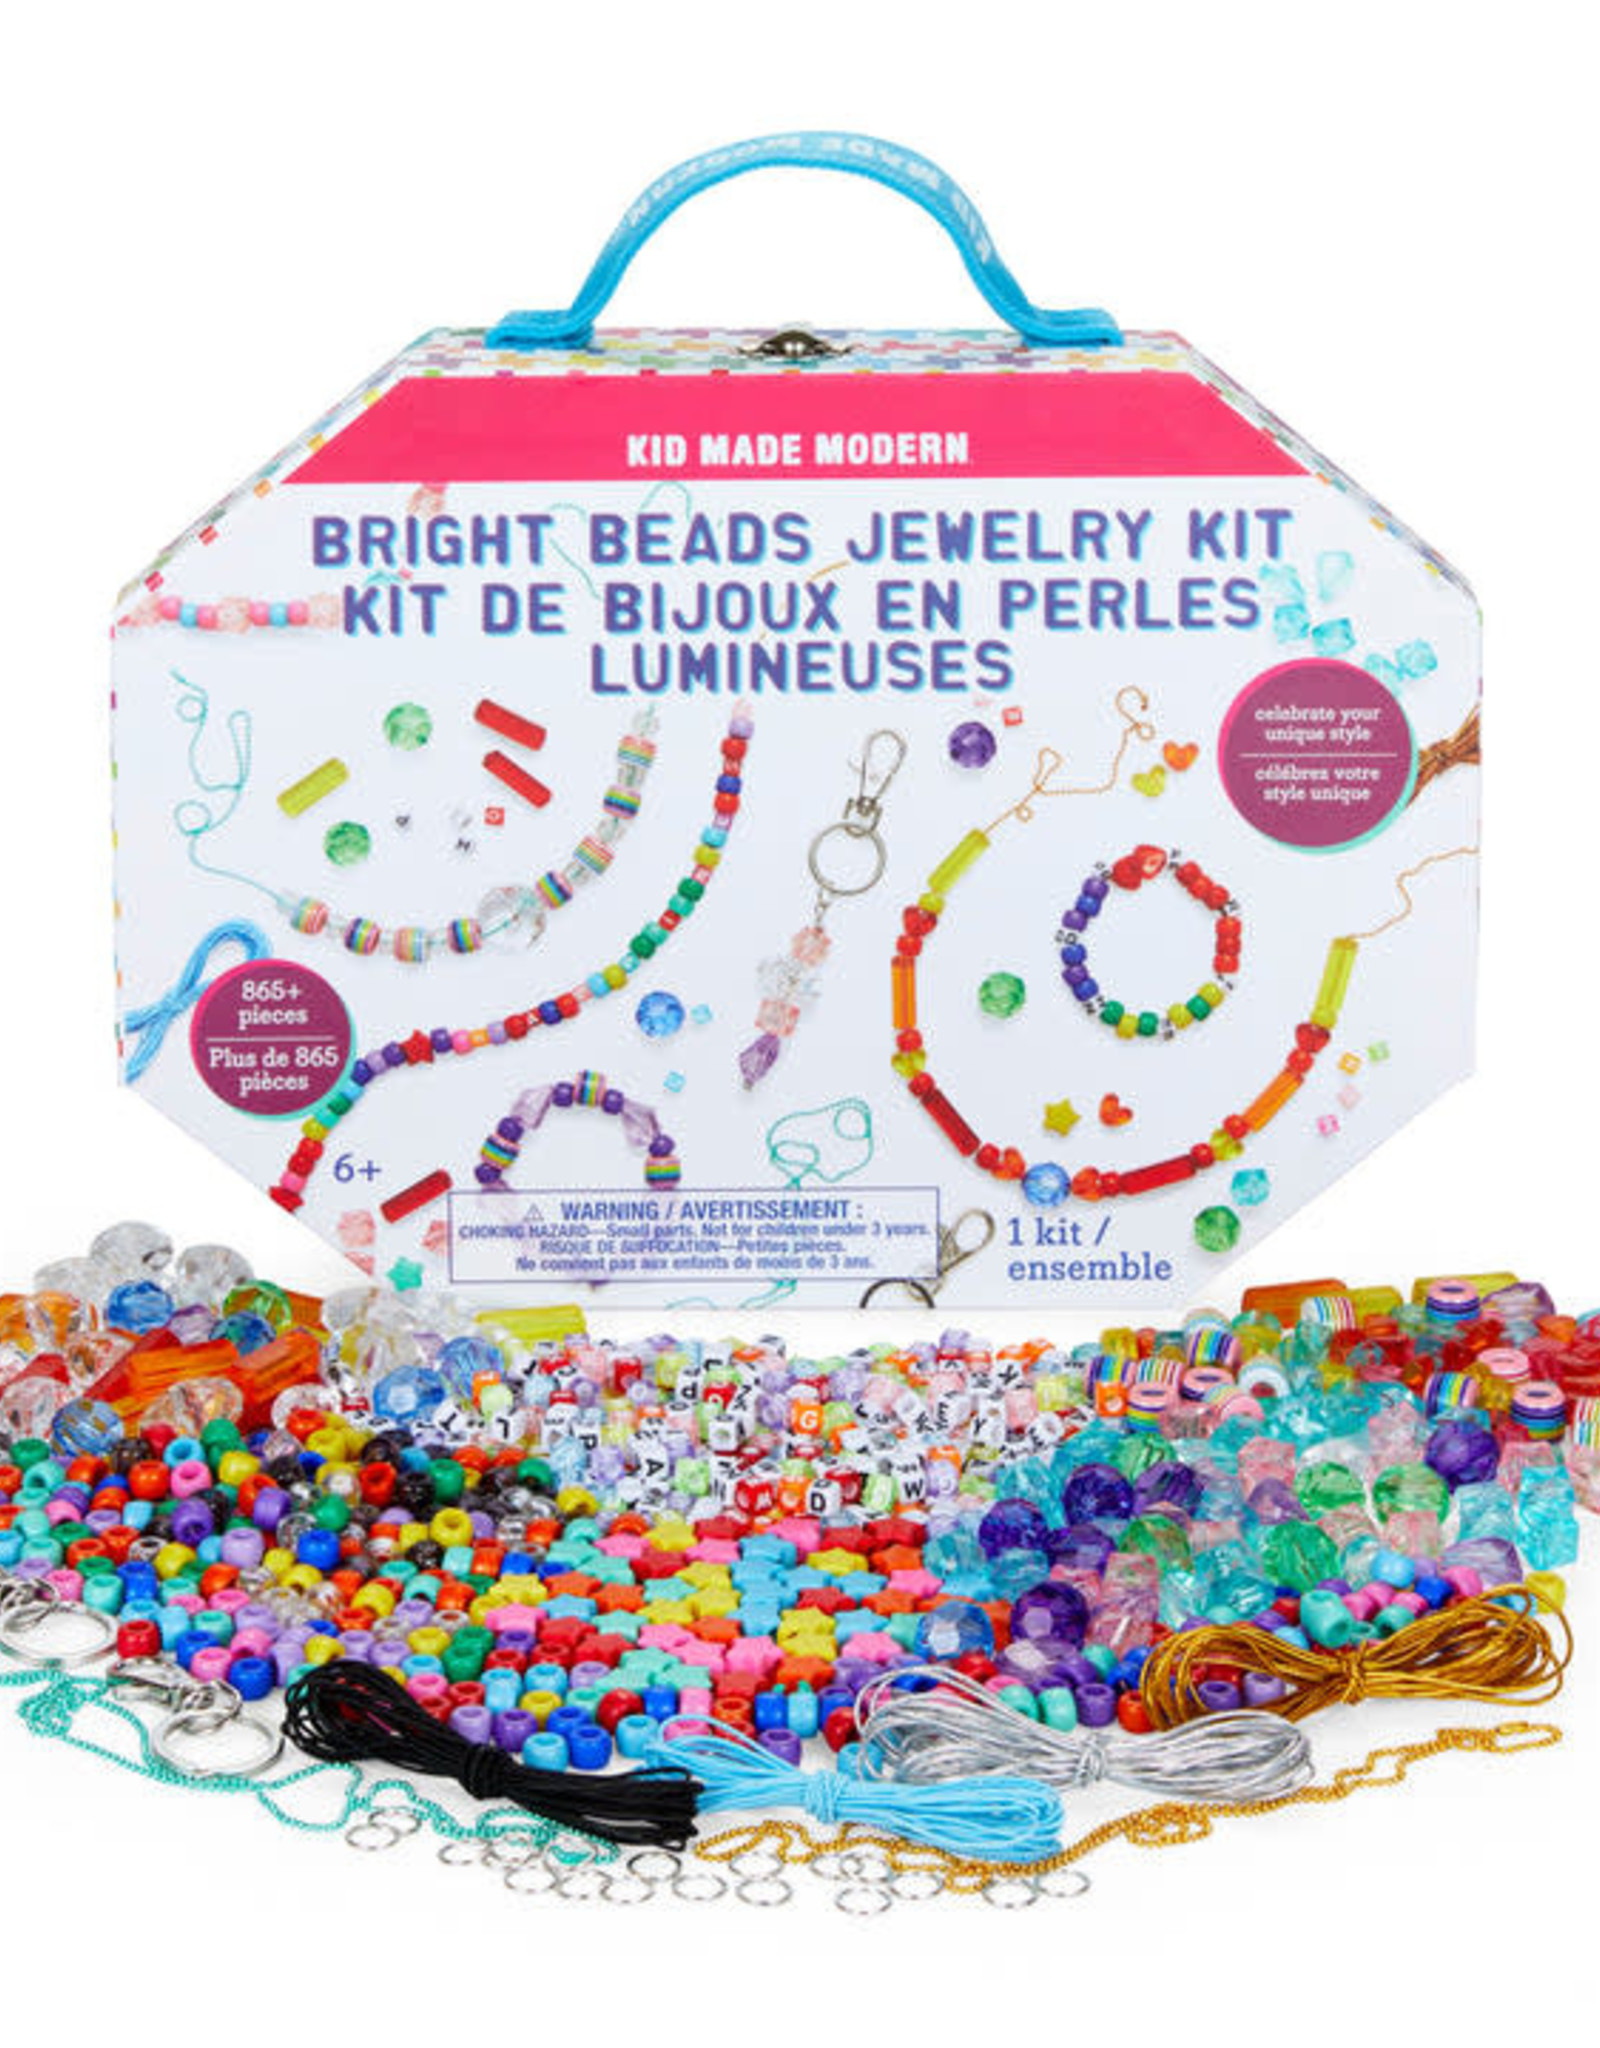 HOTALING IMPORTS Bright Beads Jewelry Kit